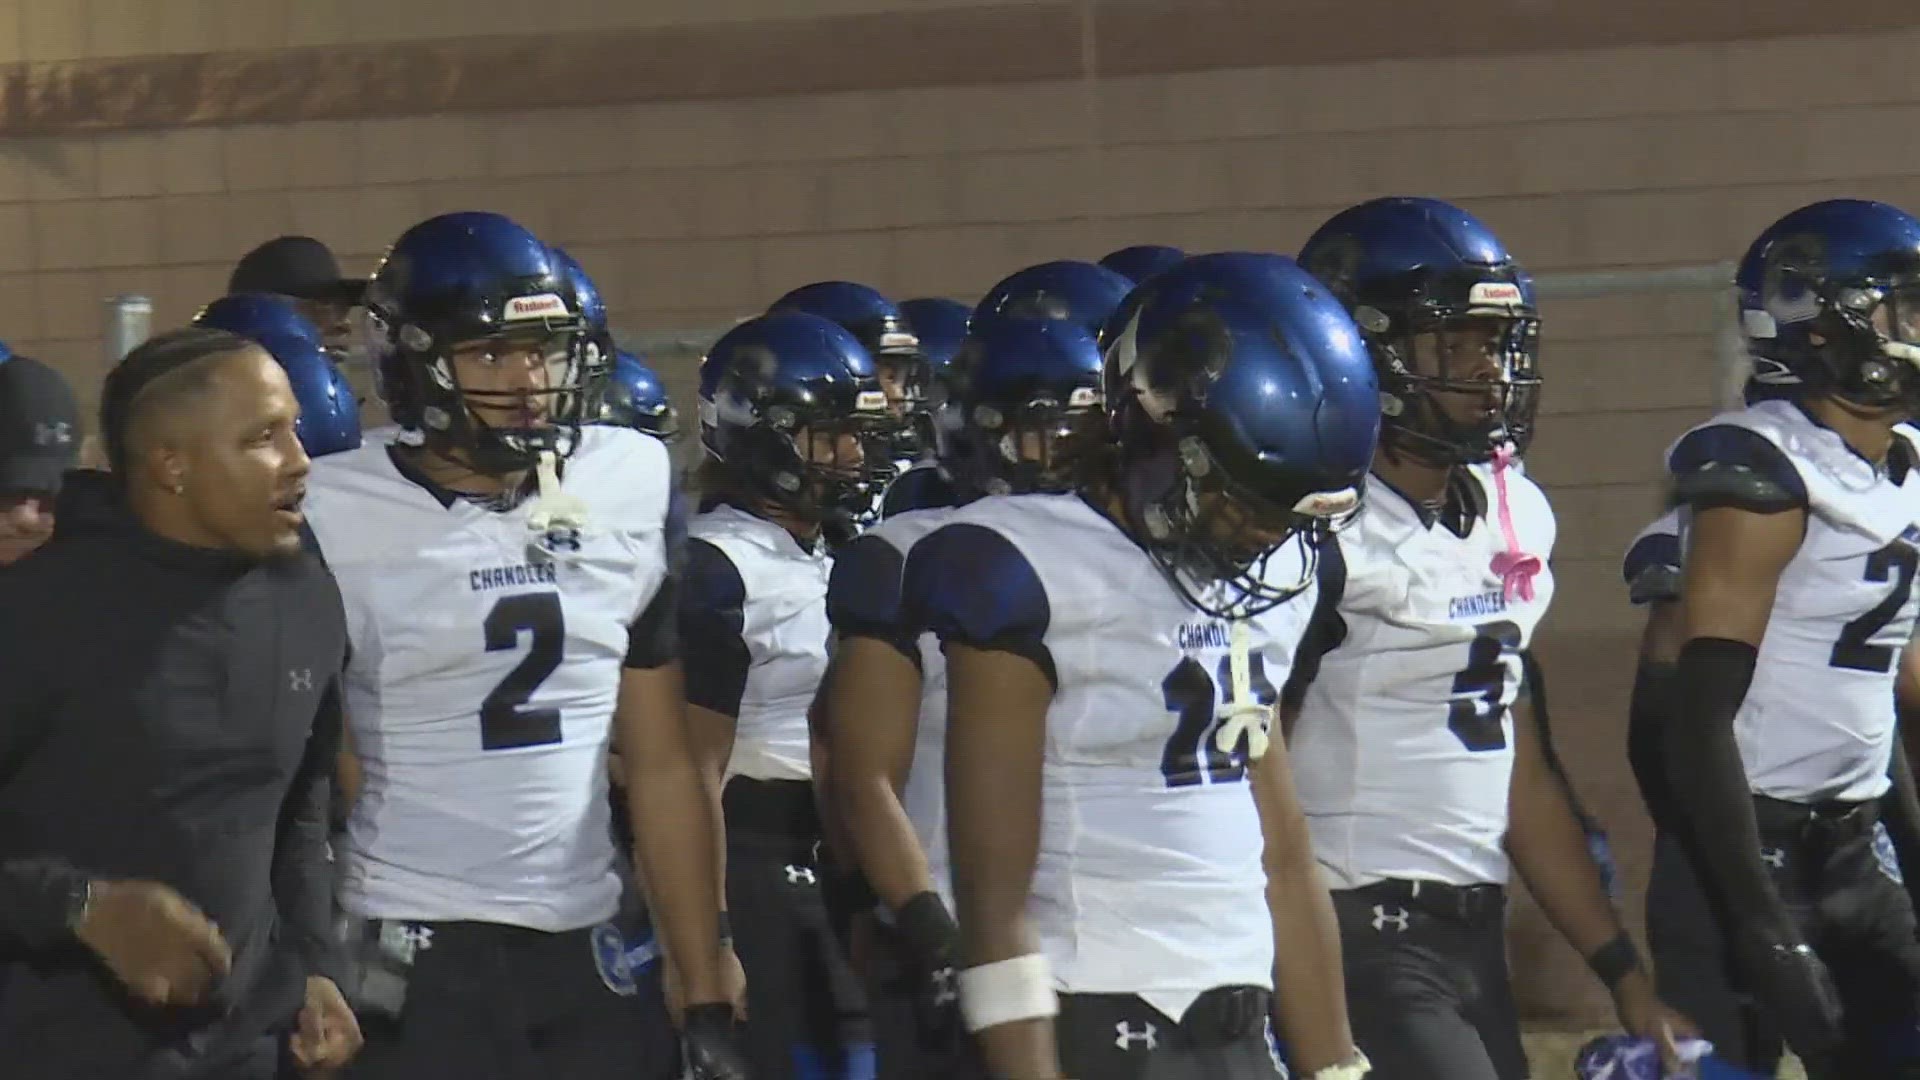 In a battle of 6A Premier region teams, Open Division #5 Chandler beat 6A #12 Perry, 45-7